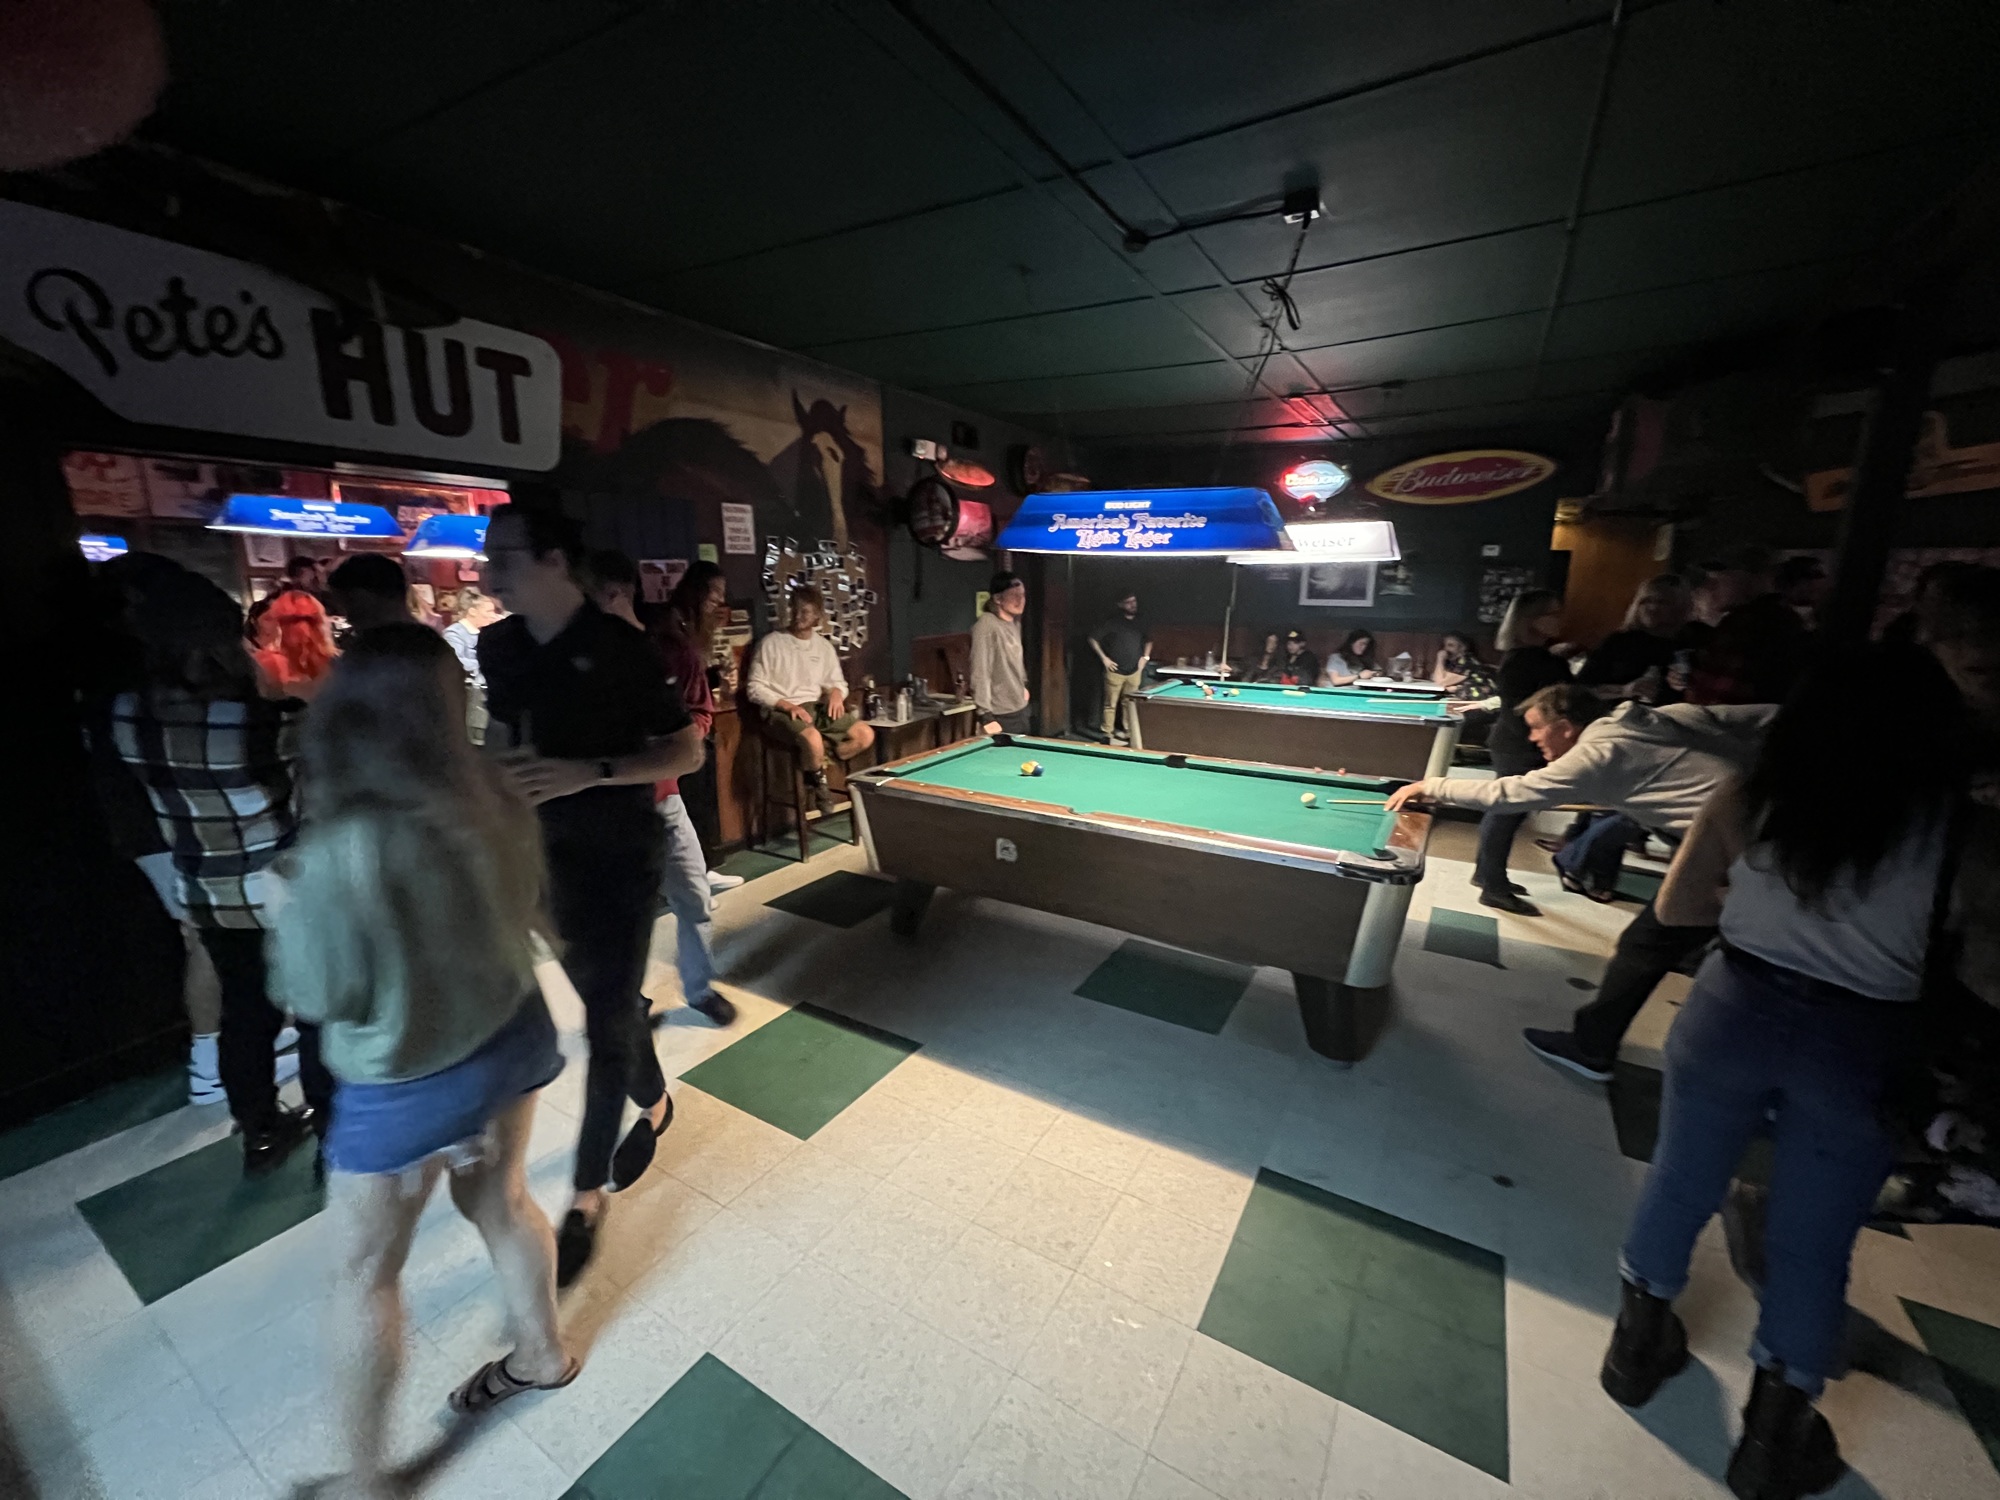 The 25-cent pool tables, pingpong and bumper pool will remain at Pete's Bar, the new owners say.